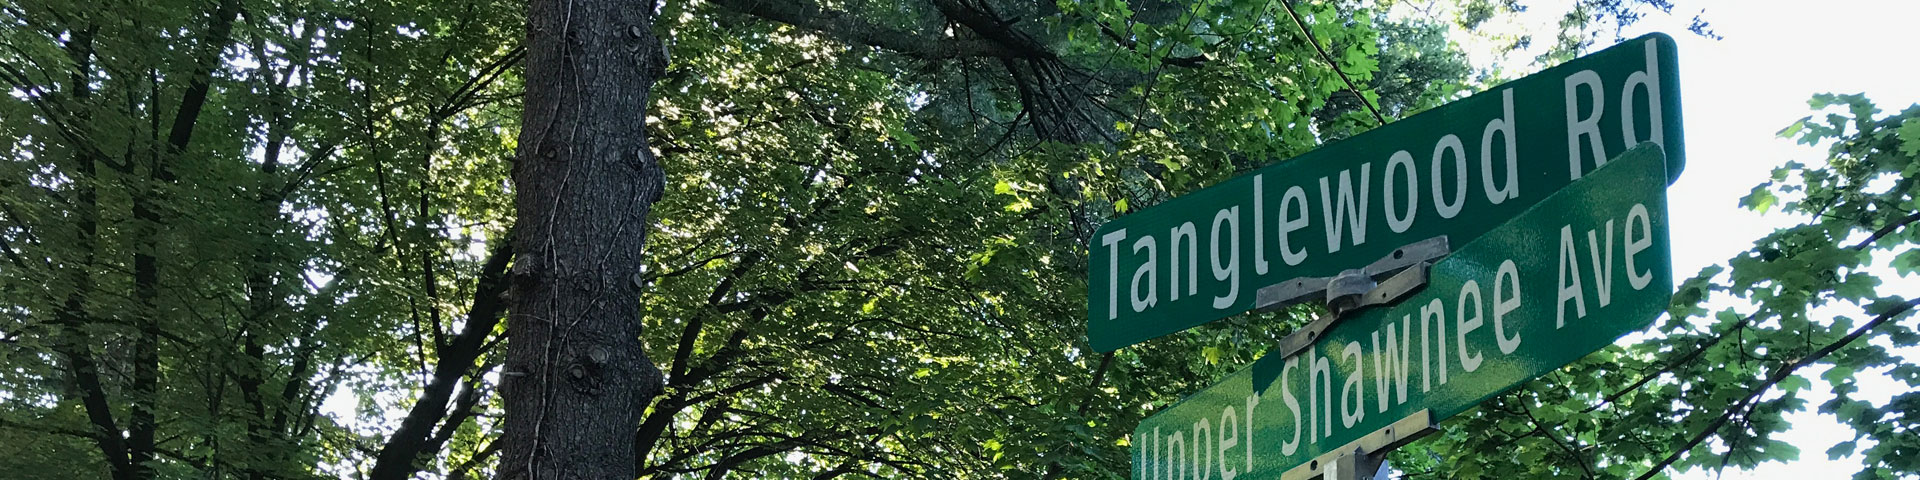 Two street signs and a stop sign appear against a background of green-leafed trees.